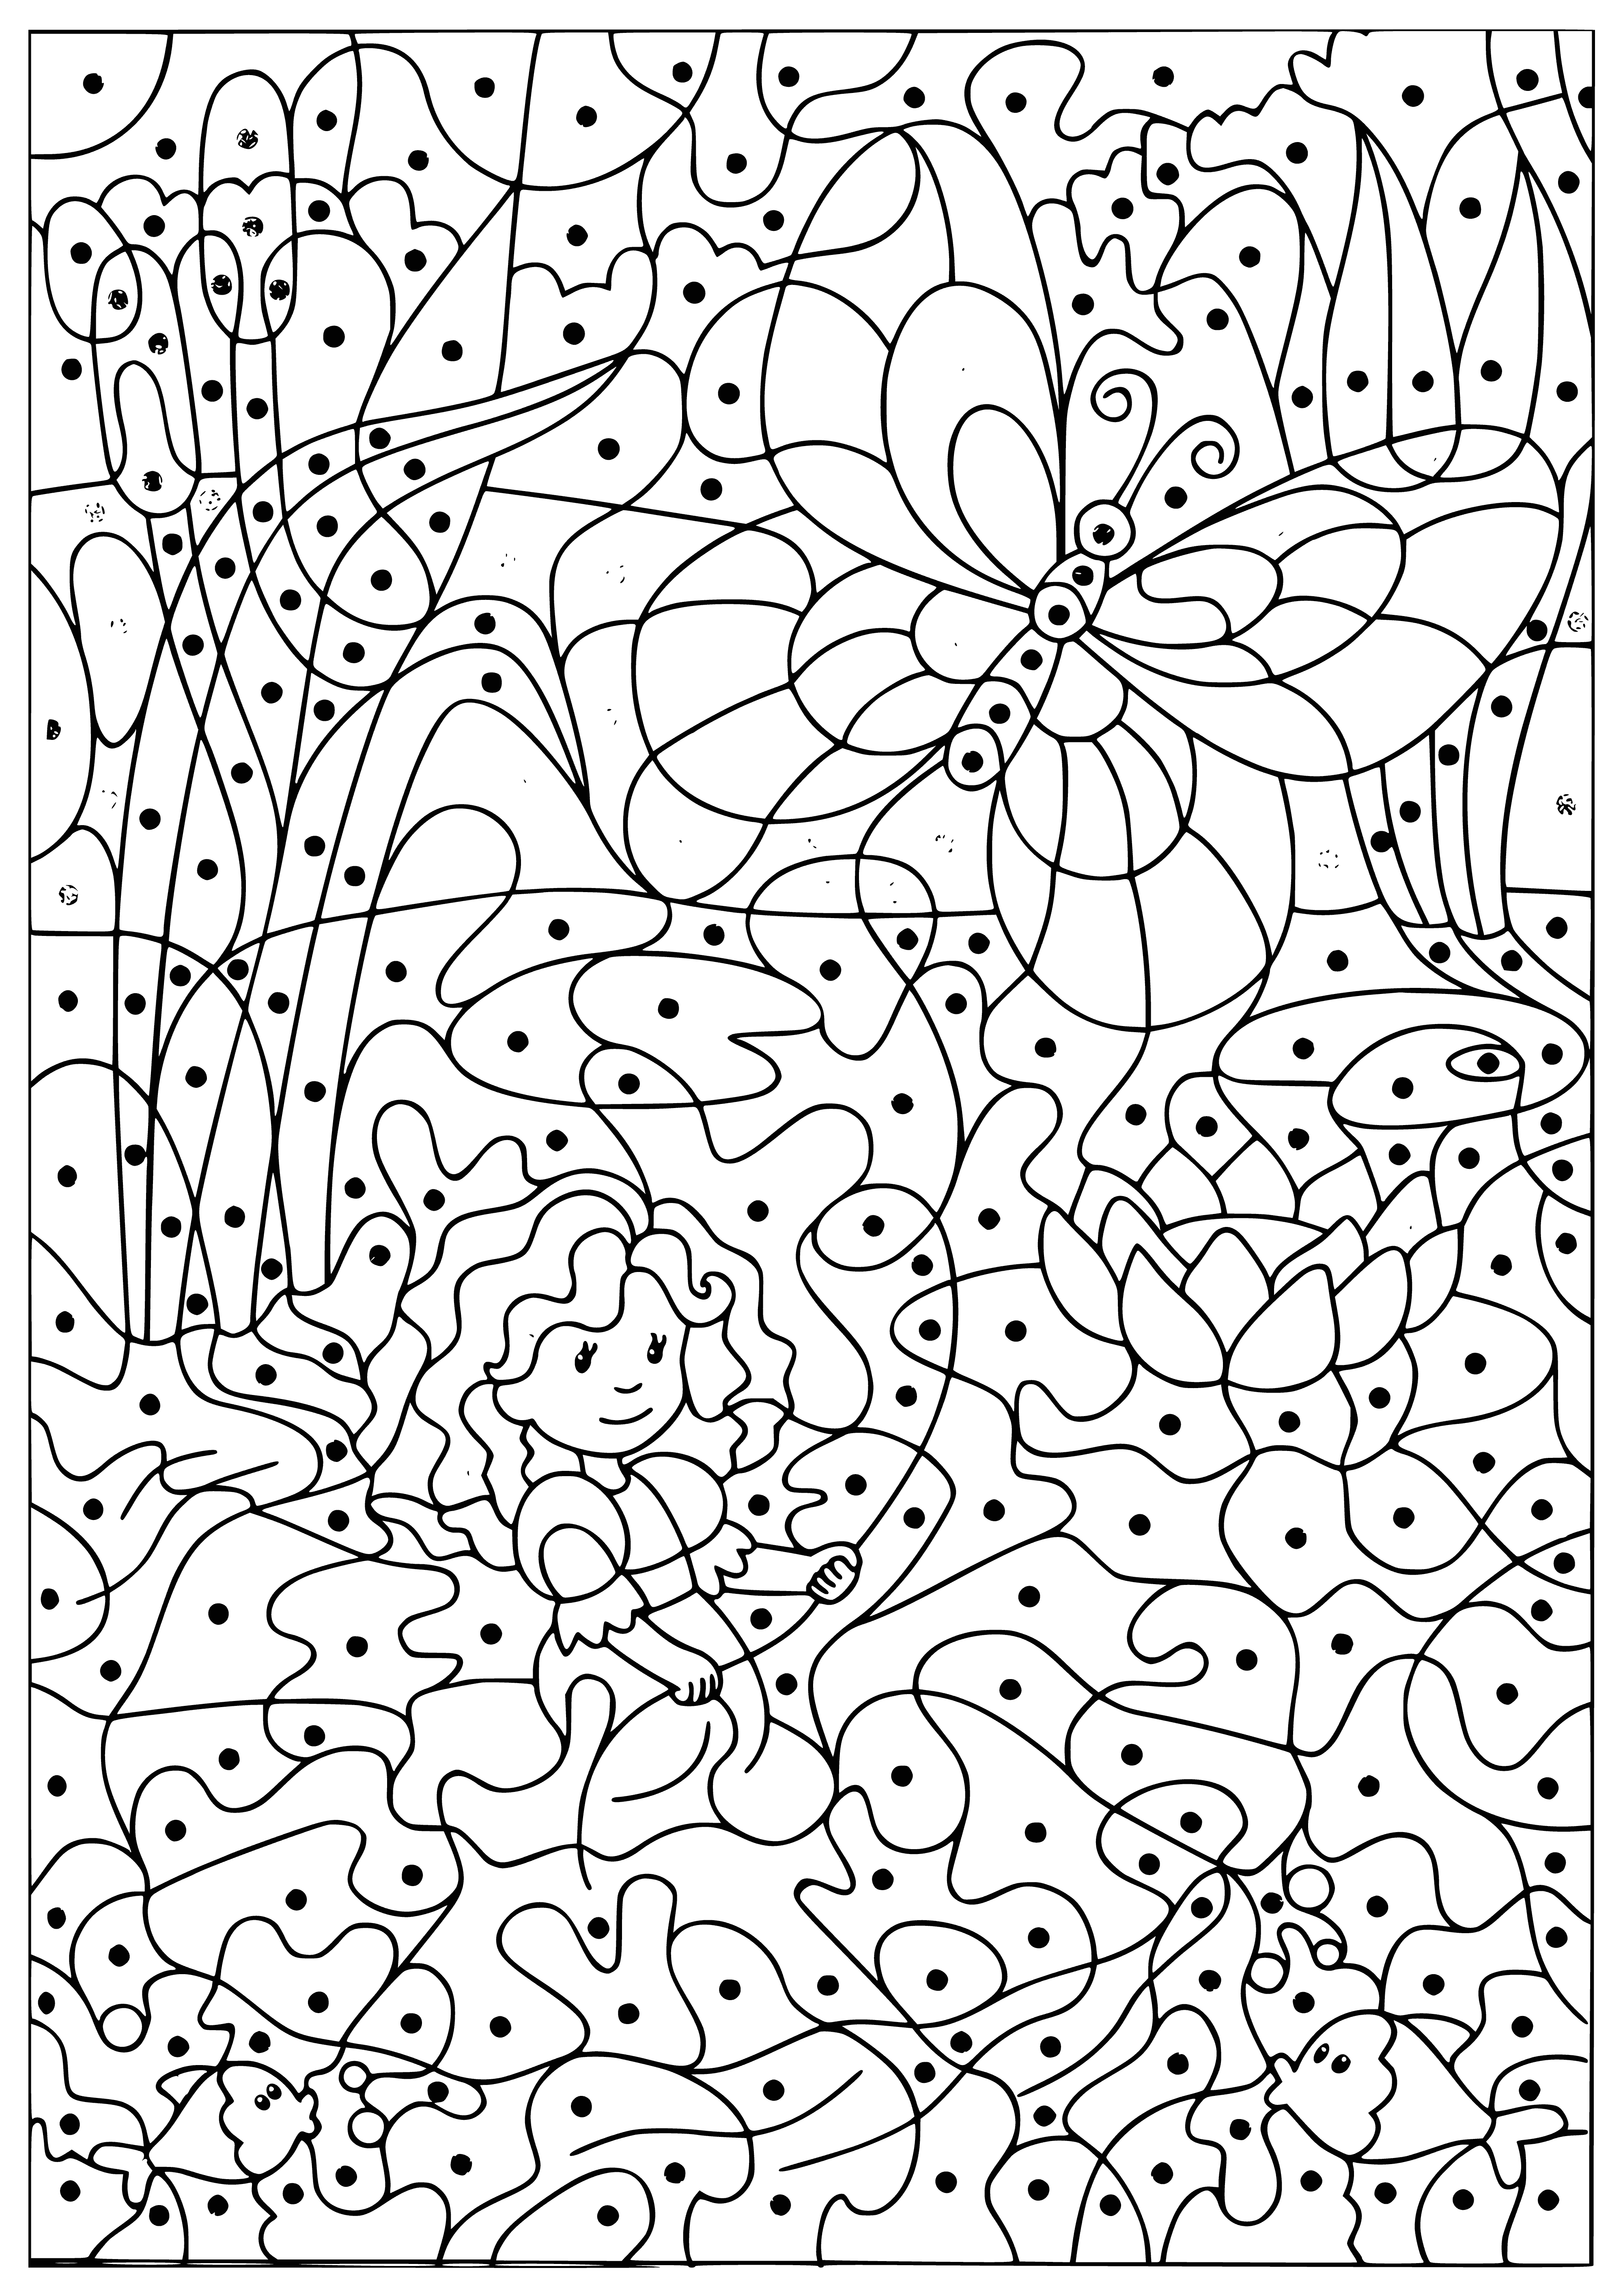 coloring page: Girl in field of flowers with wings, holding blossom: peaceful, free, and joyful.